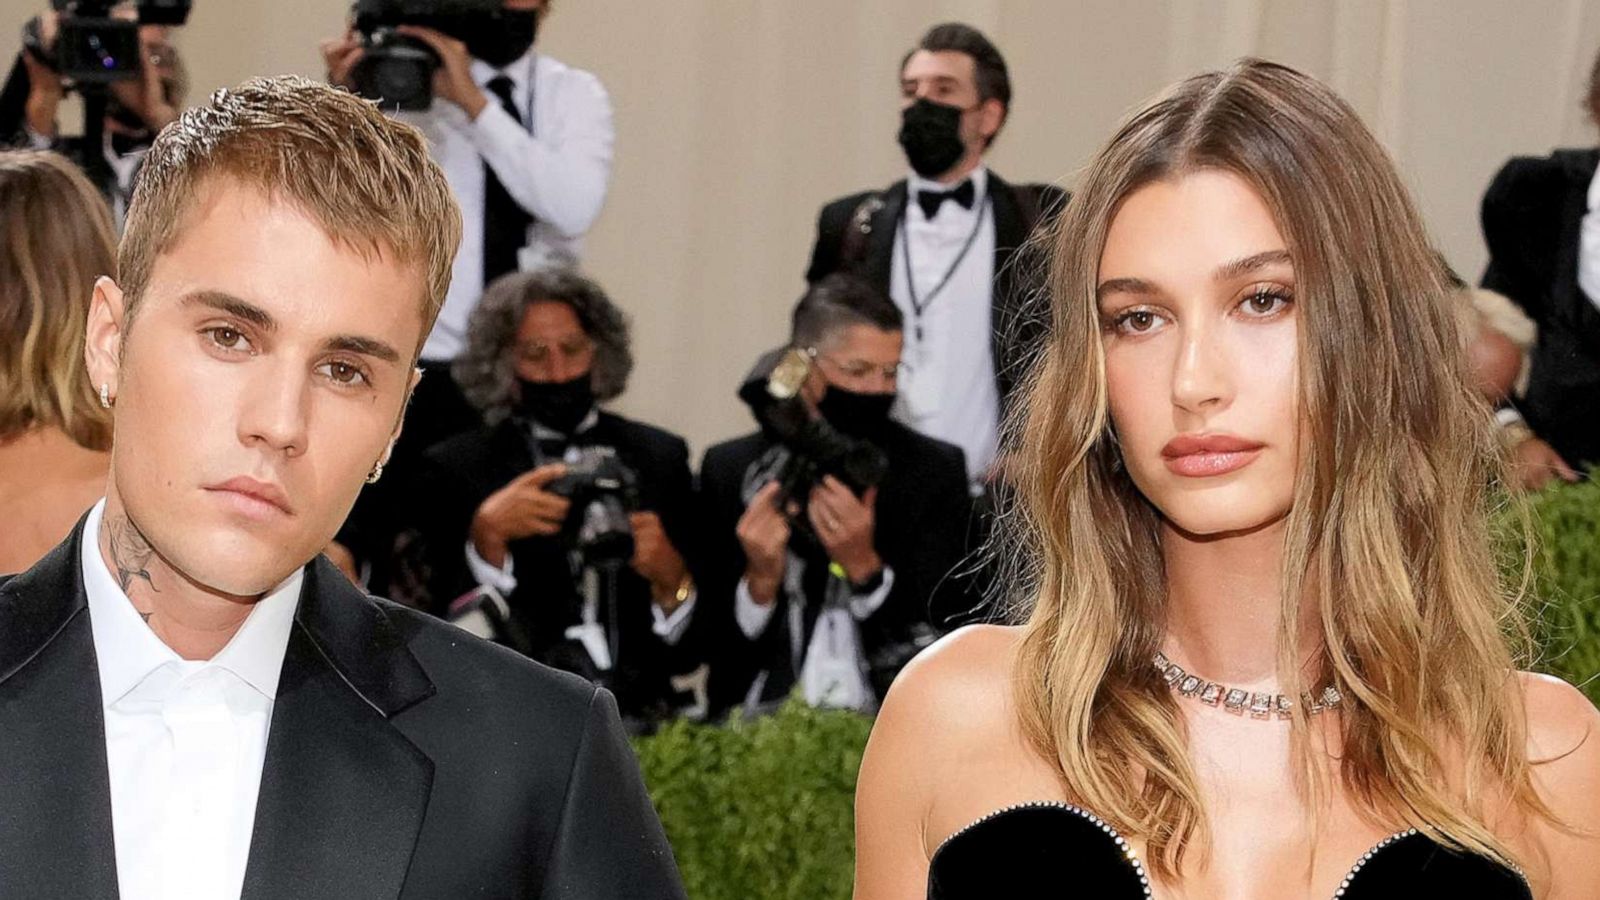 PHOTO: Justin Bieber and Hailey Bieber attend The 2021 Met Gala Celebrating In America: A Lexicon Of Fashion at Metropolitan Museum of Art on Sept. 13, 2021 in New York City.